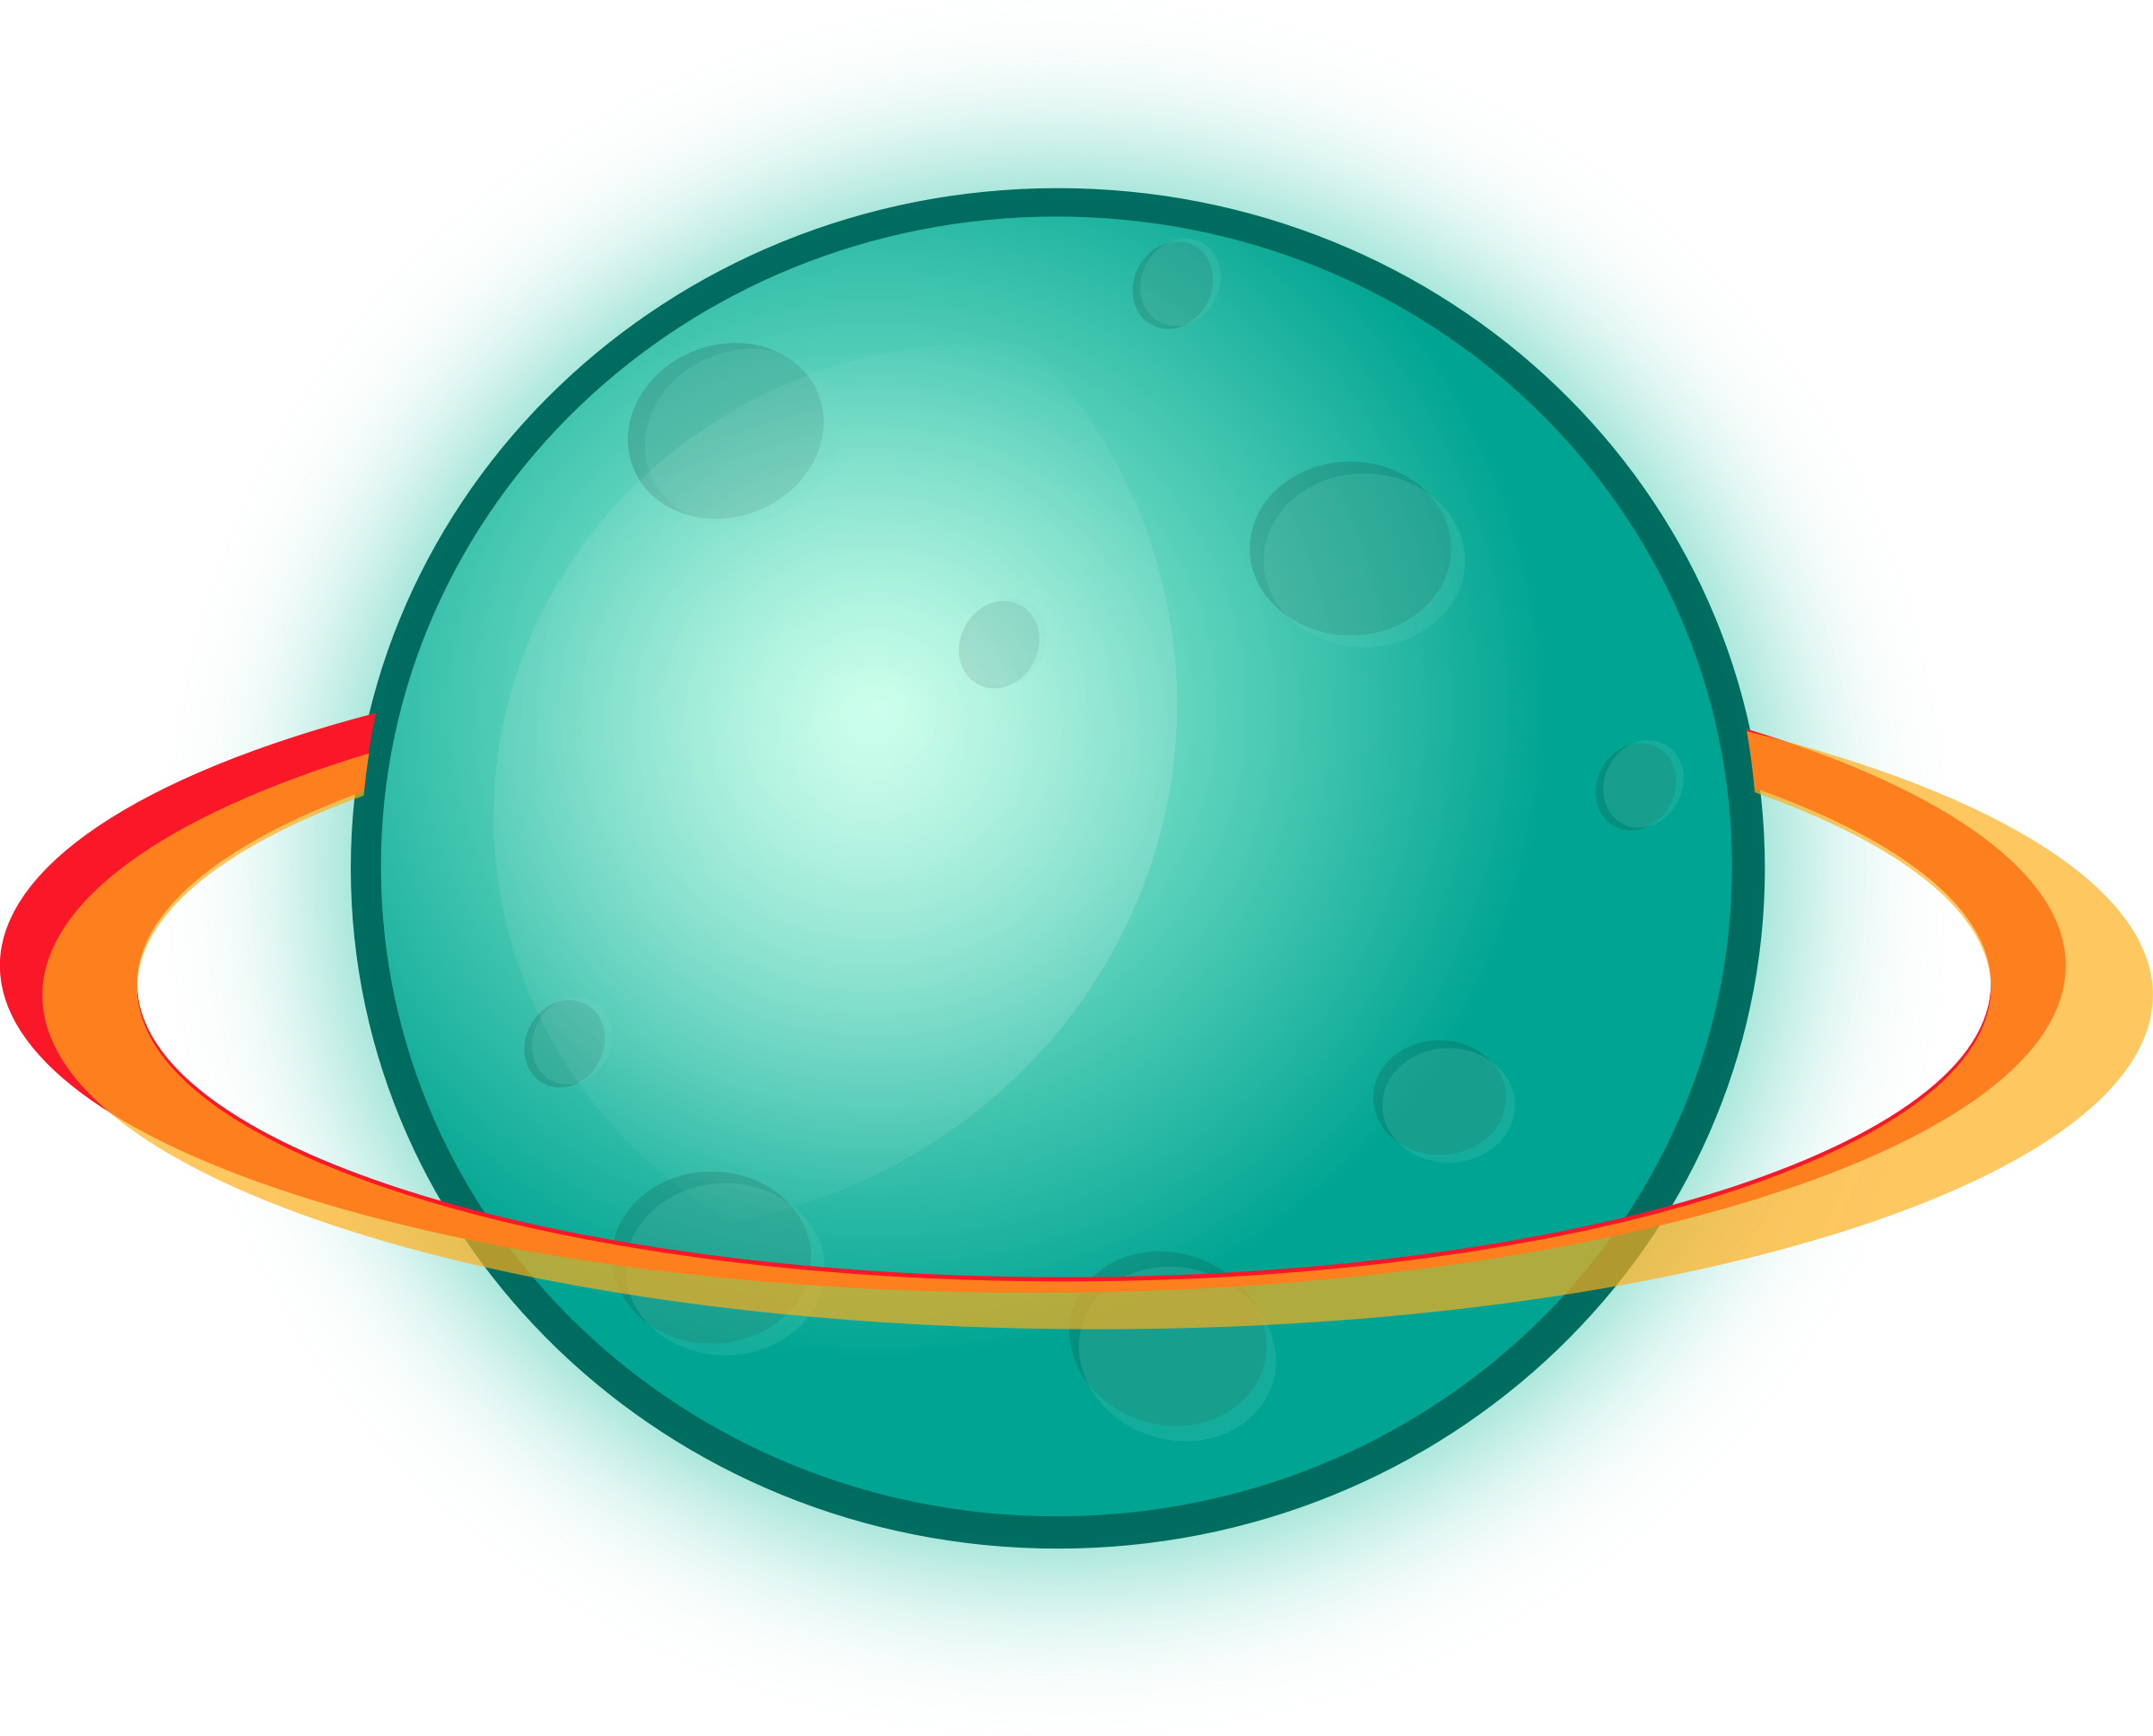 Clipart stars ring. Planet with rings by